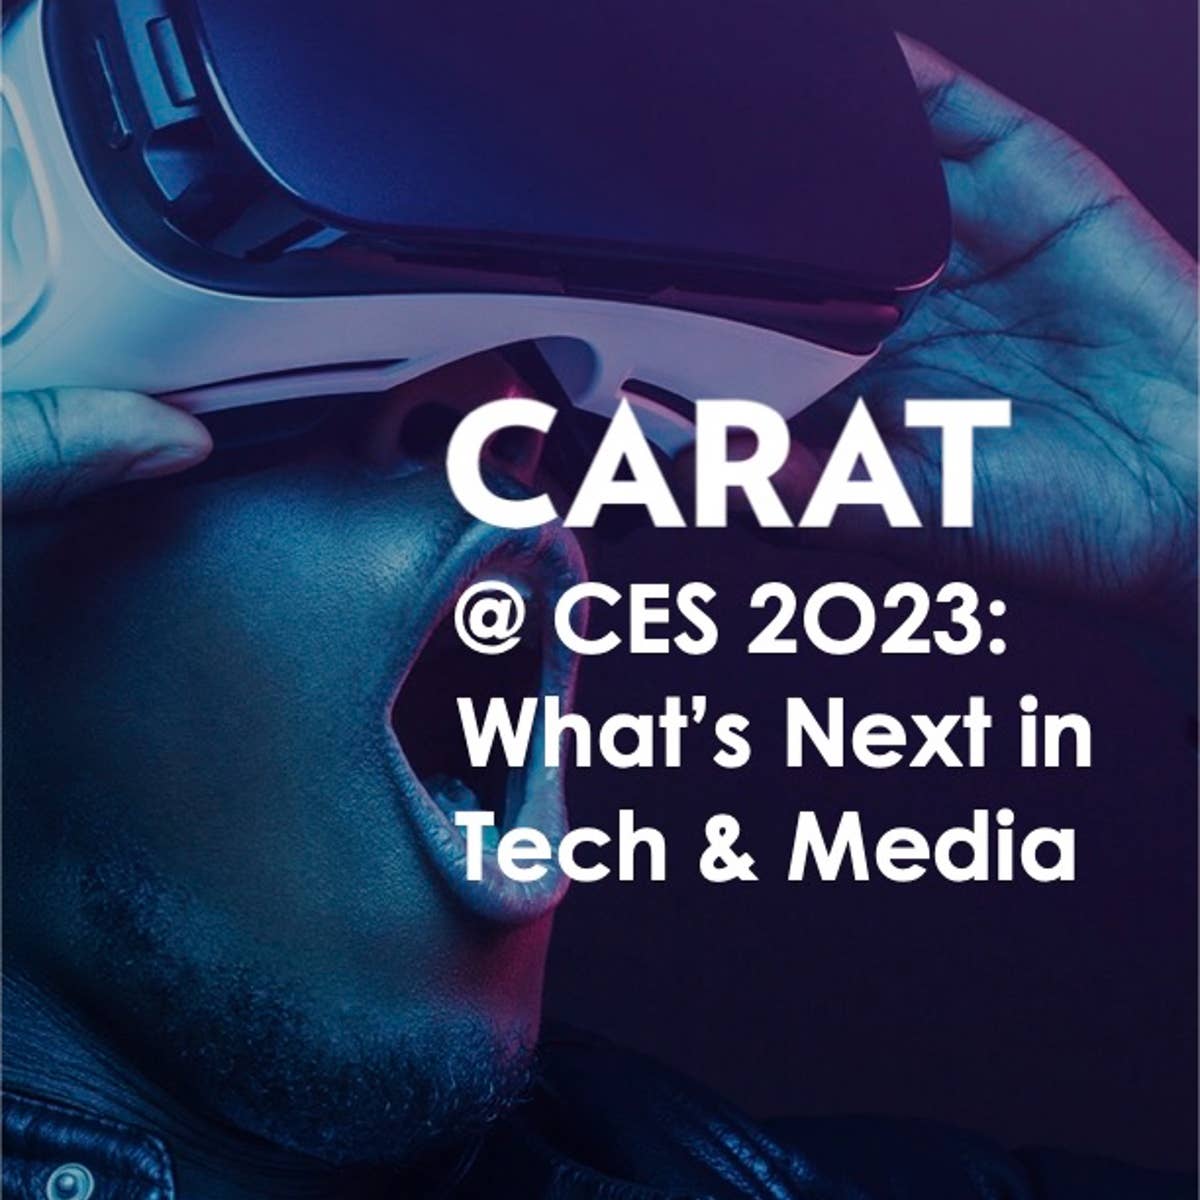 Carat @ CES 2023: What's next in Tech & Media